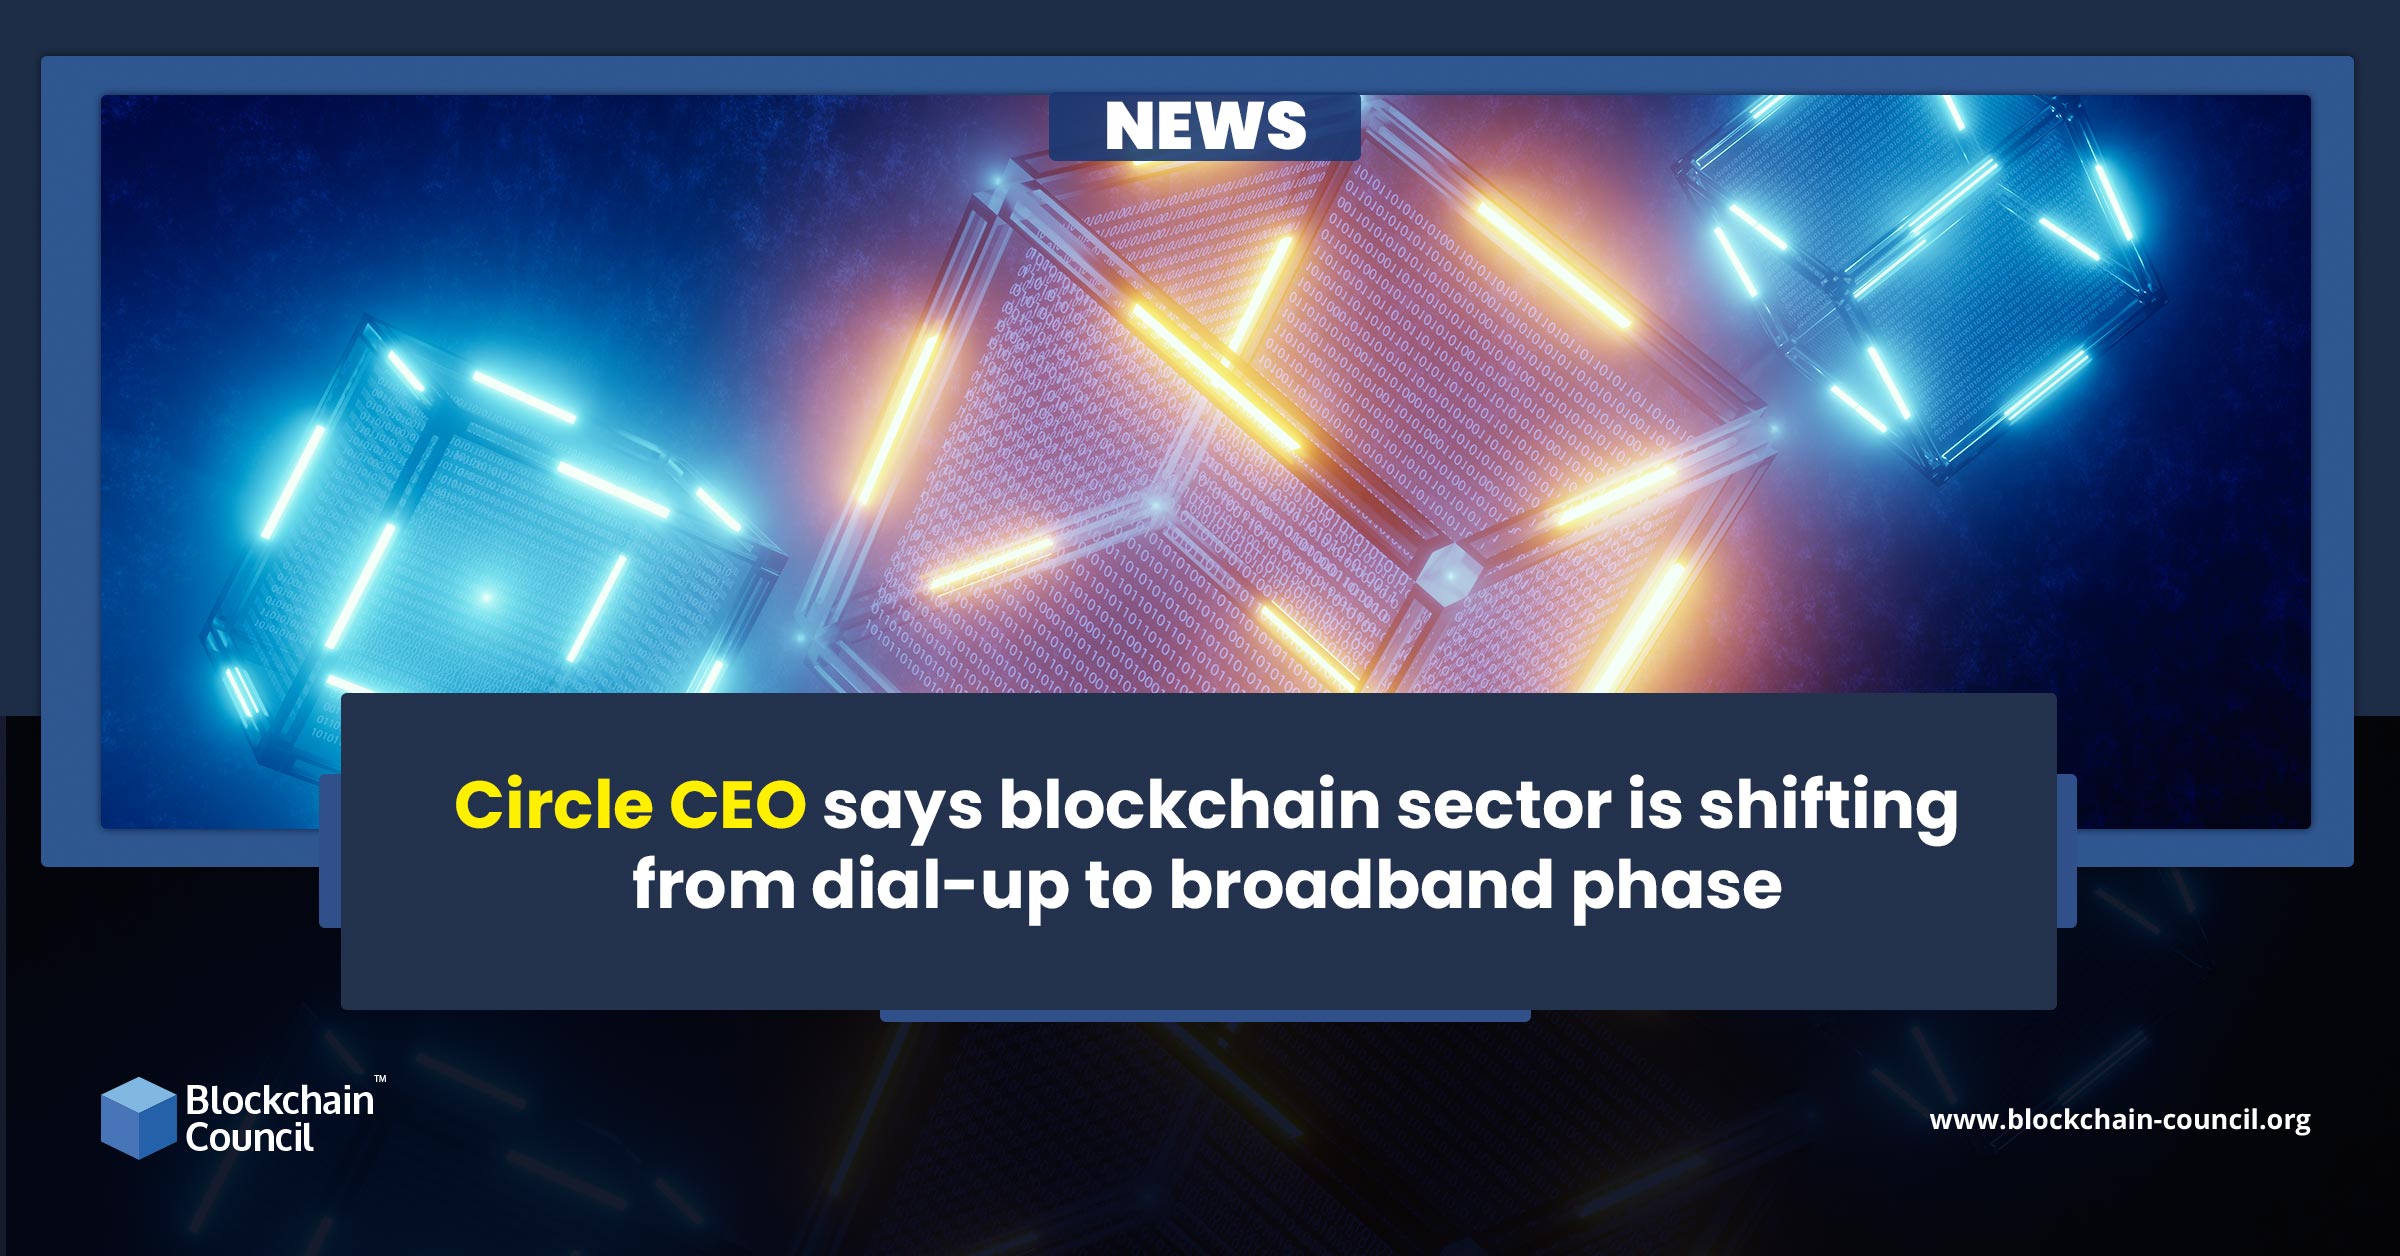 Circle CEO says blockchain sector is shifting from dial-up to broadband phase